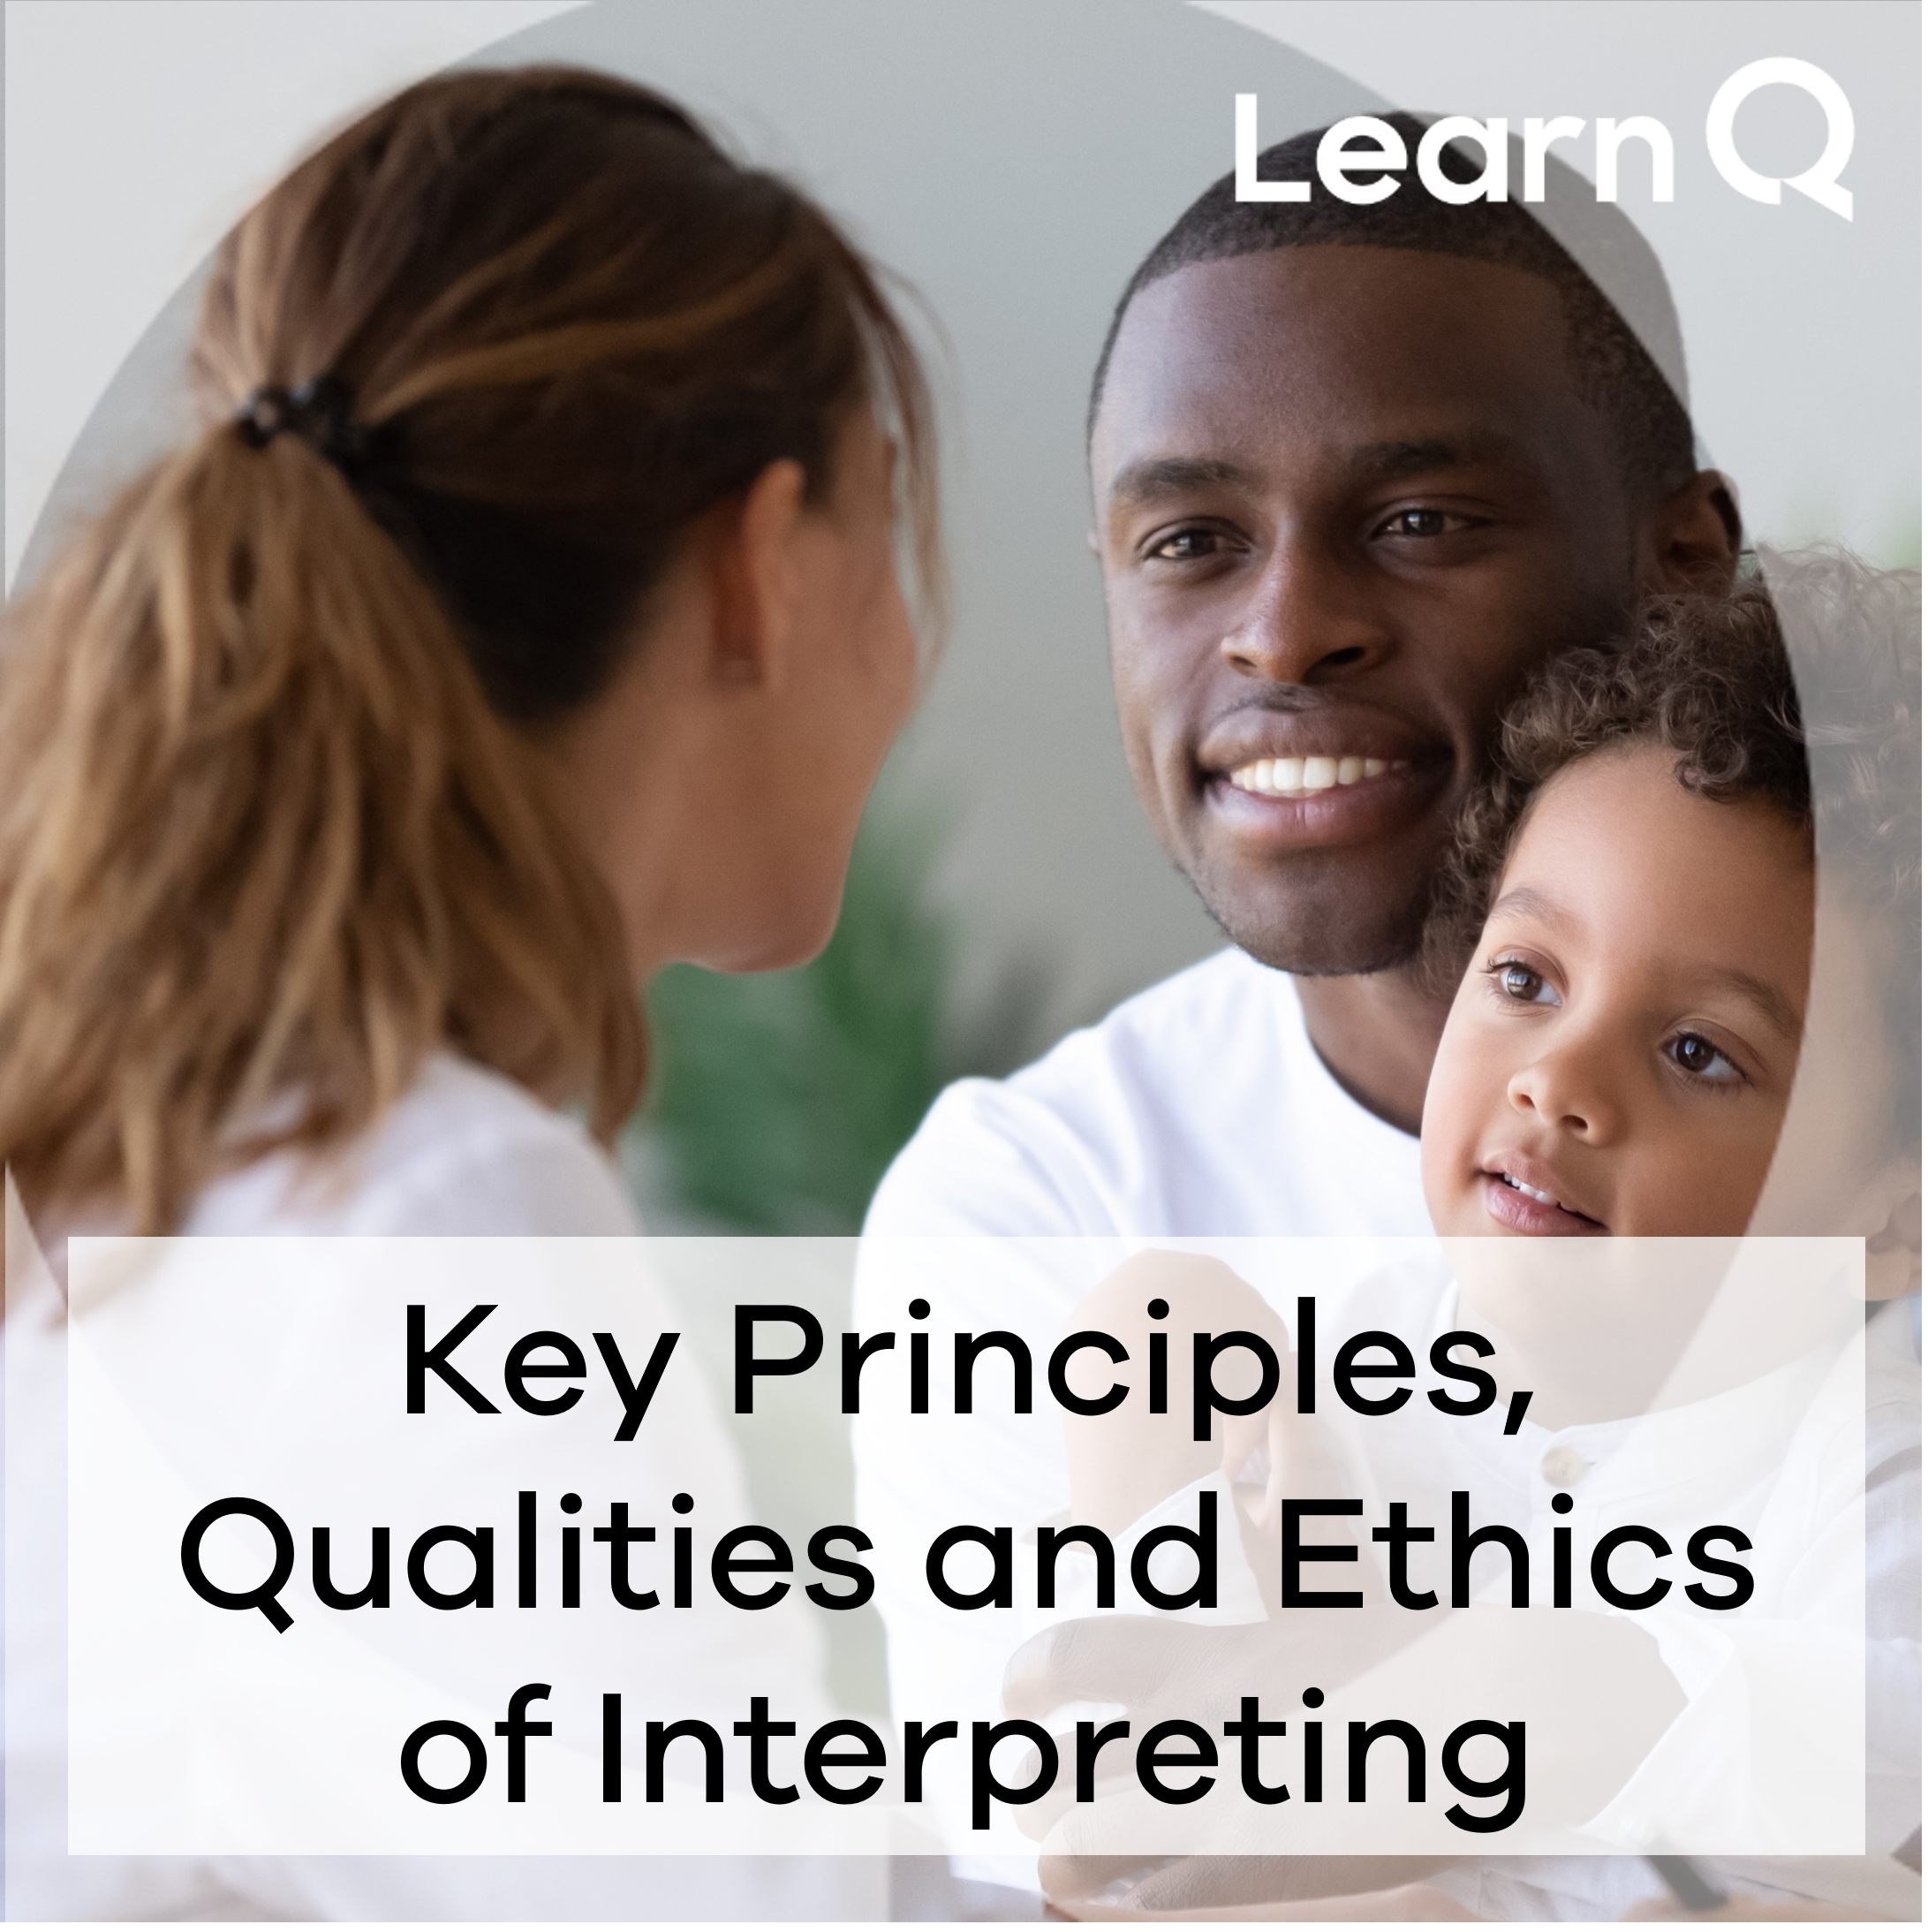 Key Principles, Qualities and Ethics of Interpreting blog post of a conversation between a doctor and a family